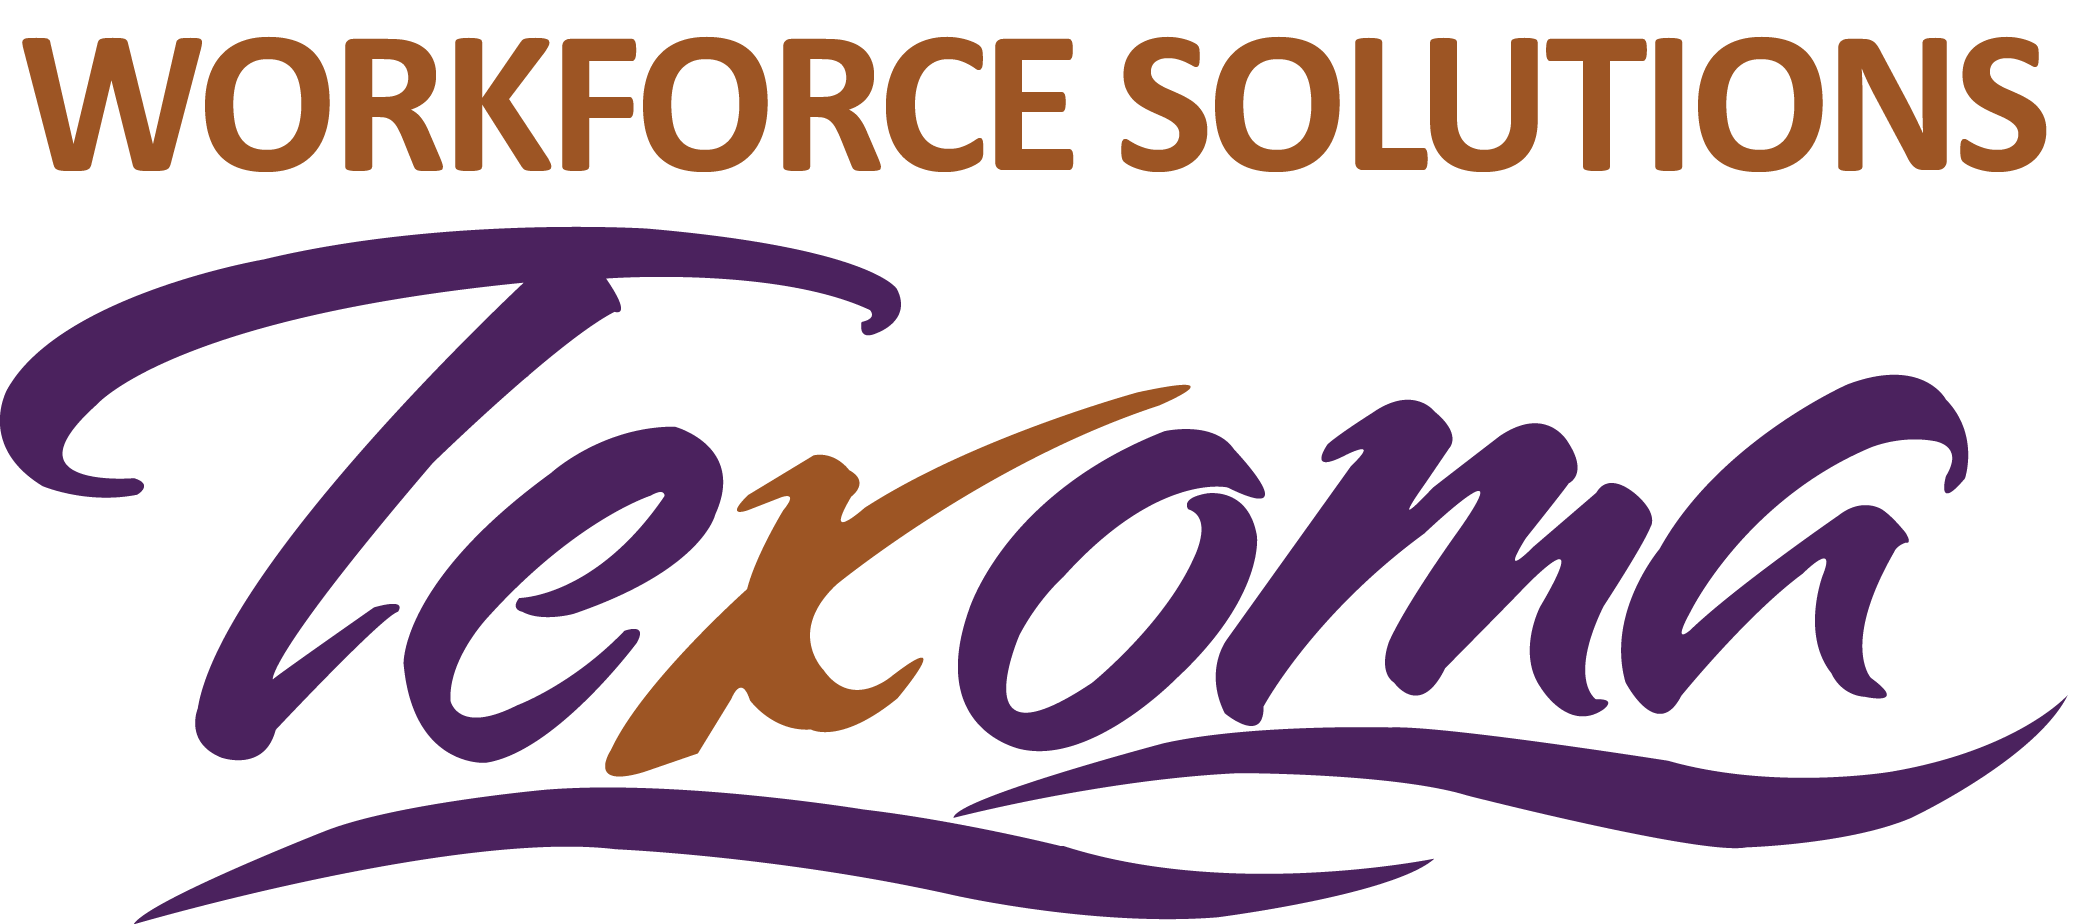 Workforce Solutions Texoma's Logo